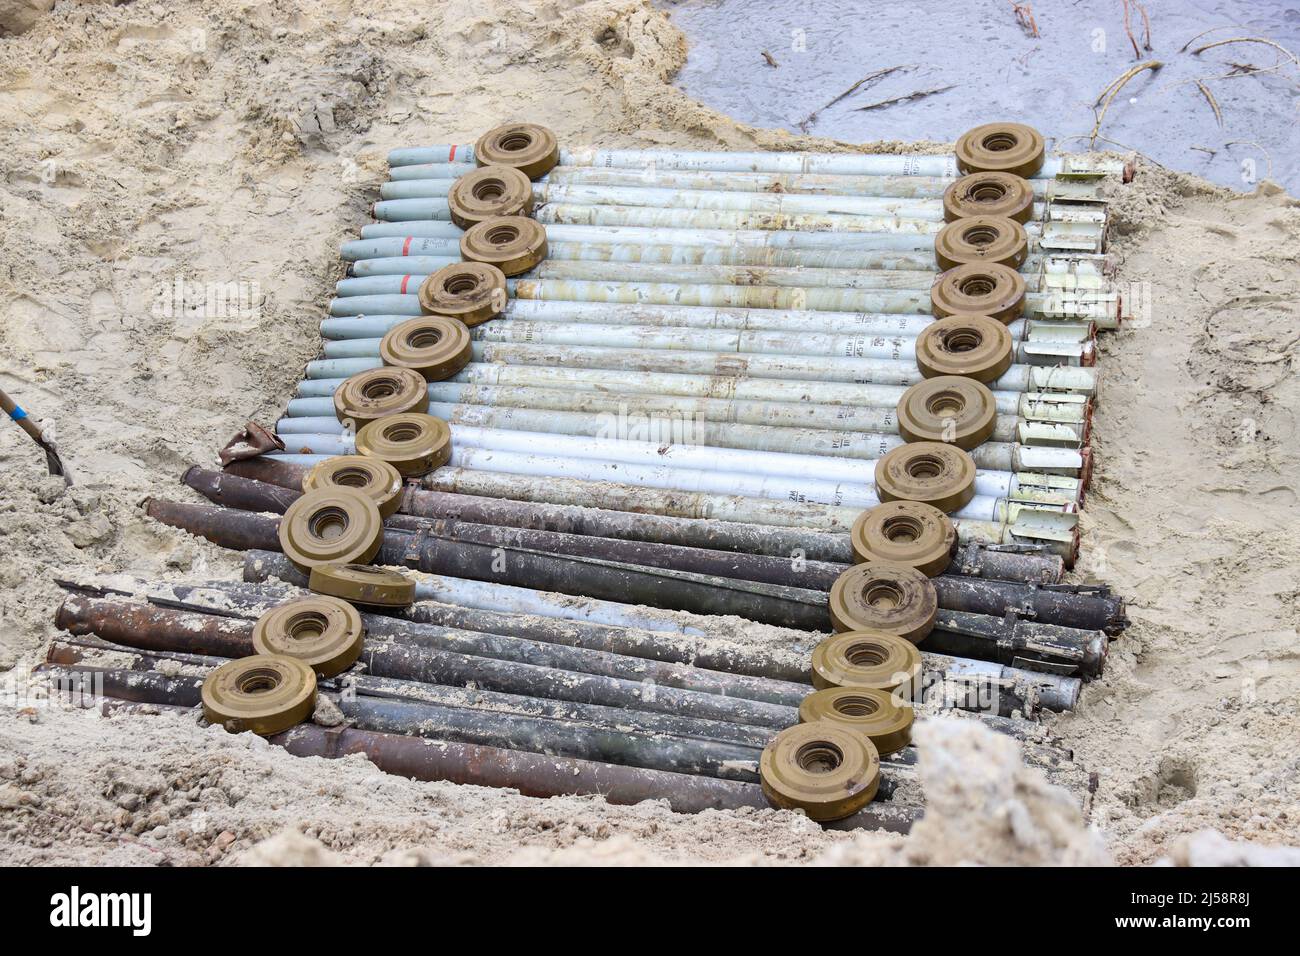 KYIV REGION, UKRAINE - APRIL 20, 2022 - Land mines press down missiles arranged on the ground during the disposal of ammunition collected in the terri Stock Photo